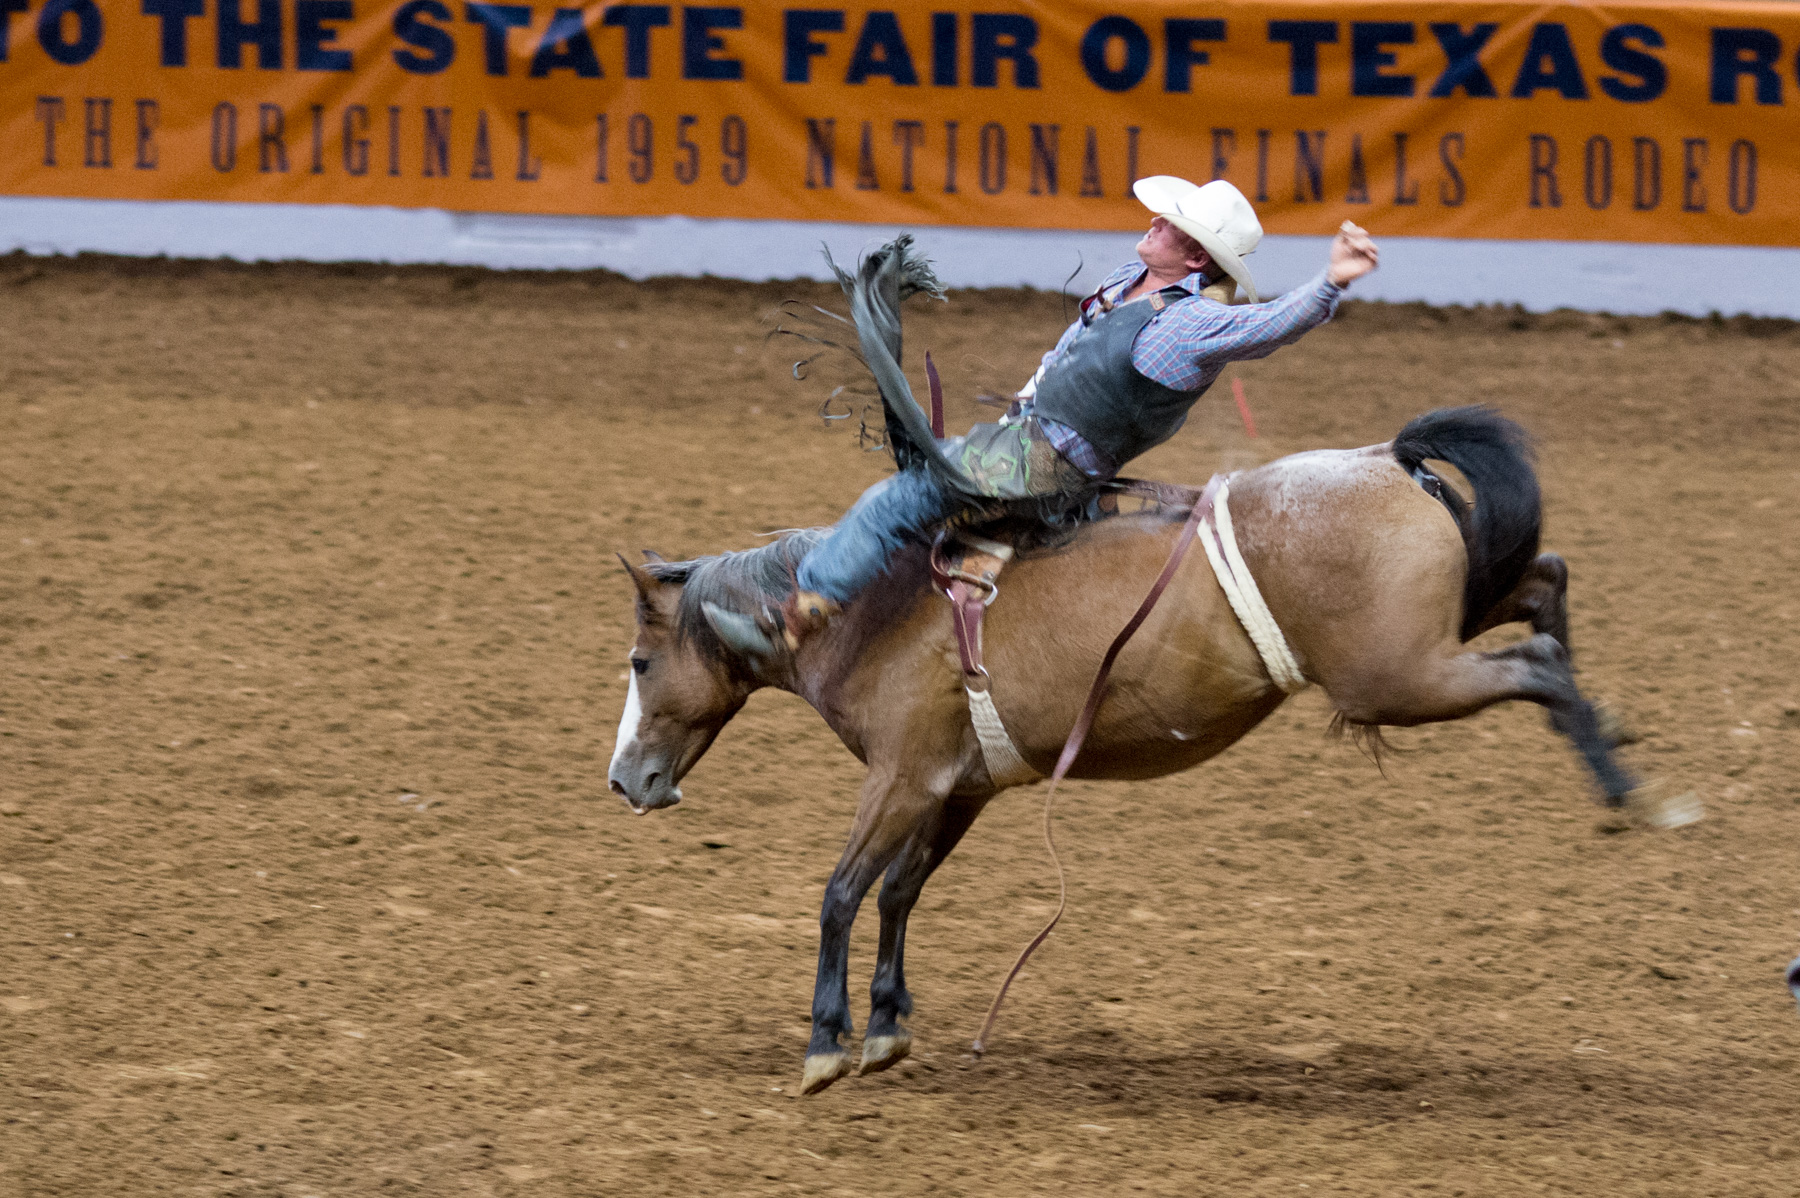 Gallery A Wild Ride at the State Fair of Texas Rodeo D Magazine